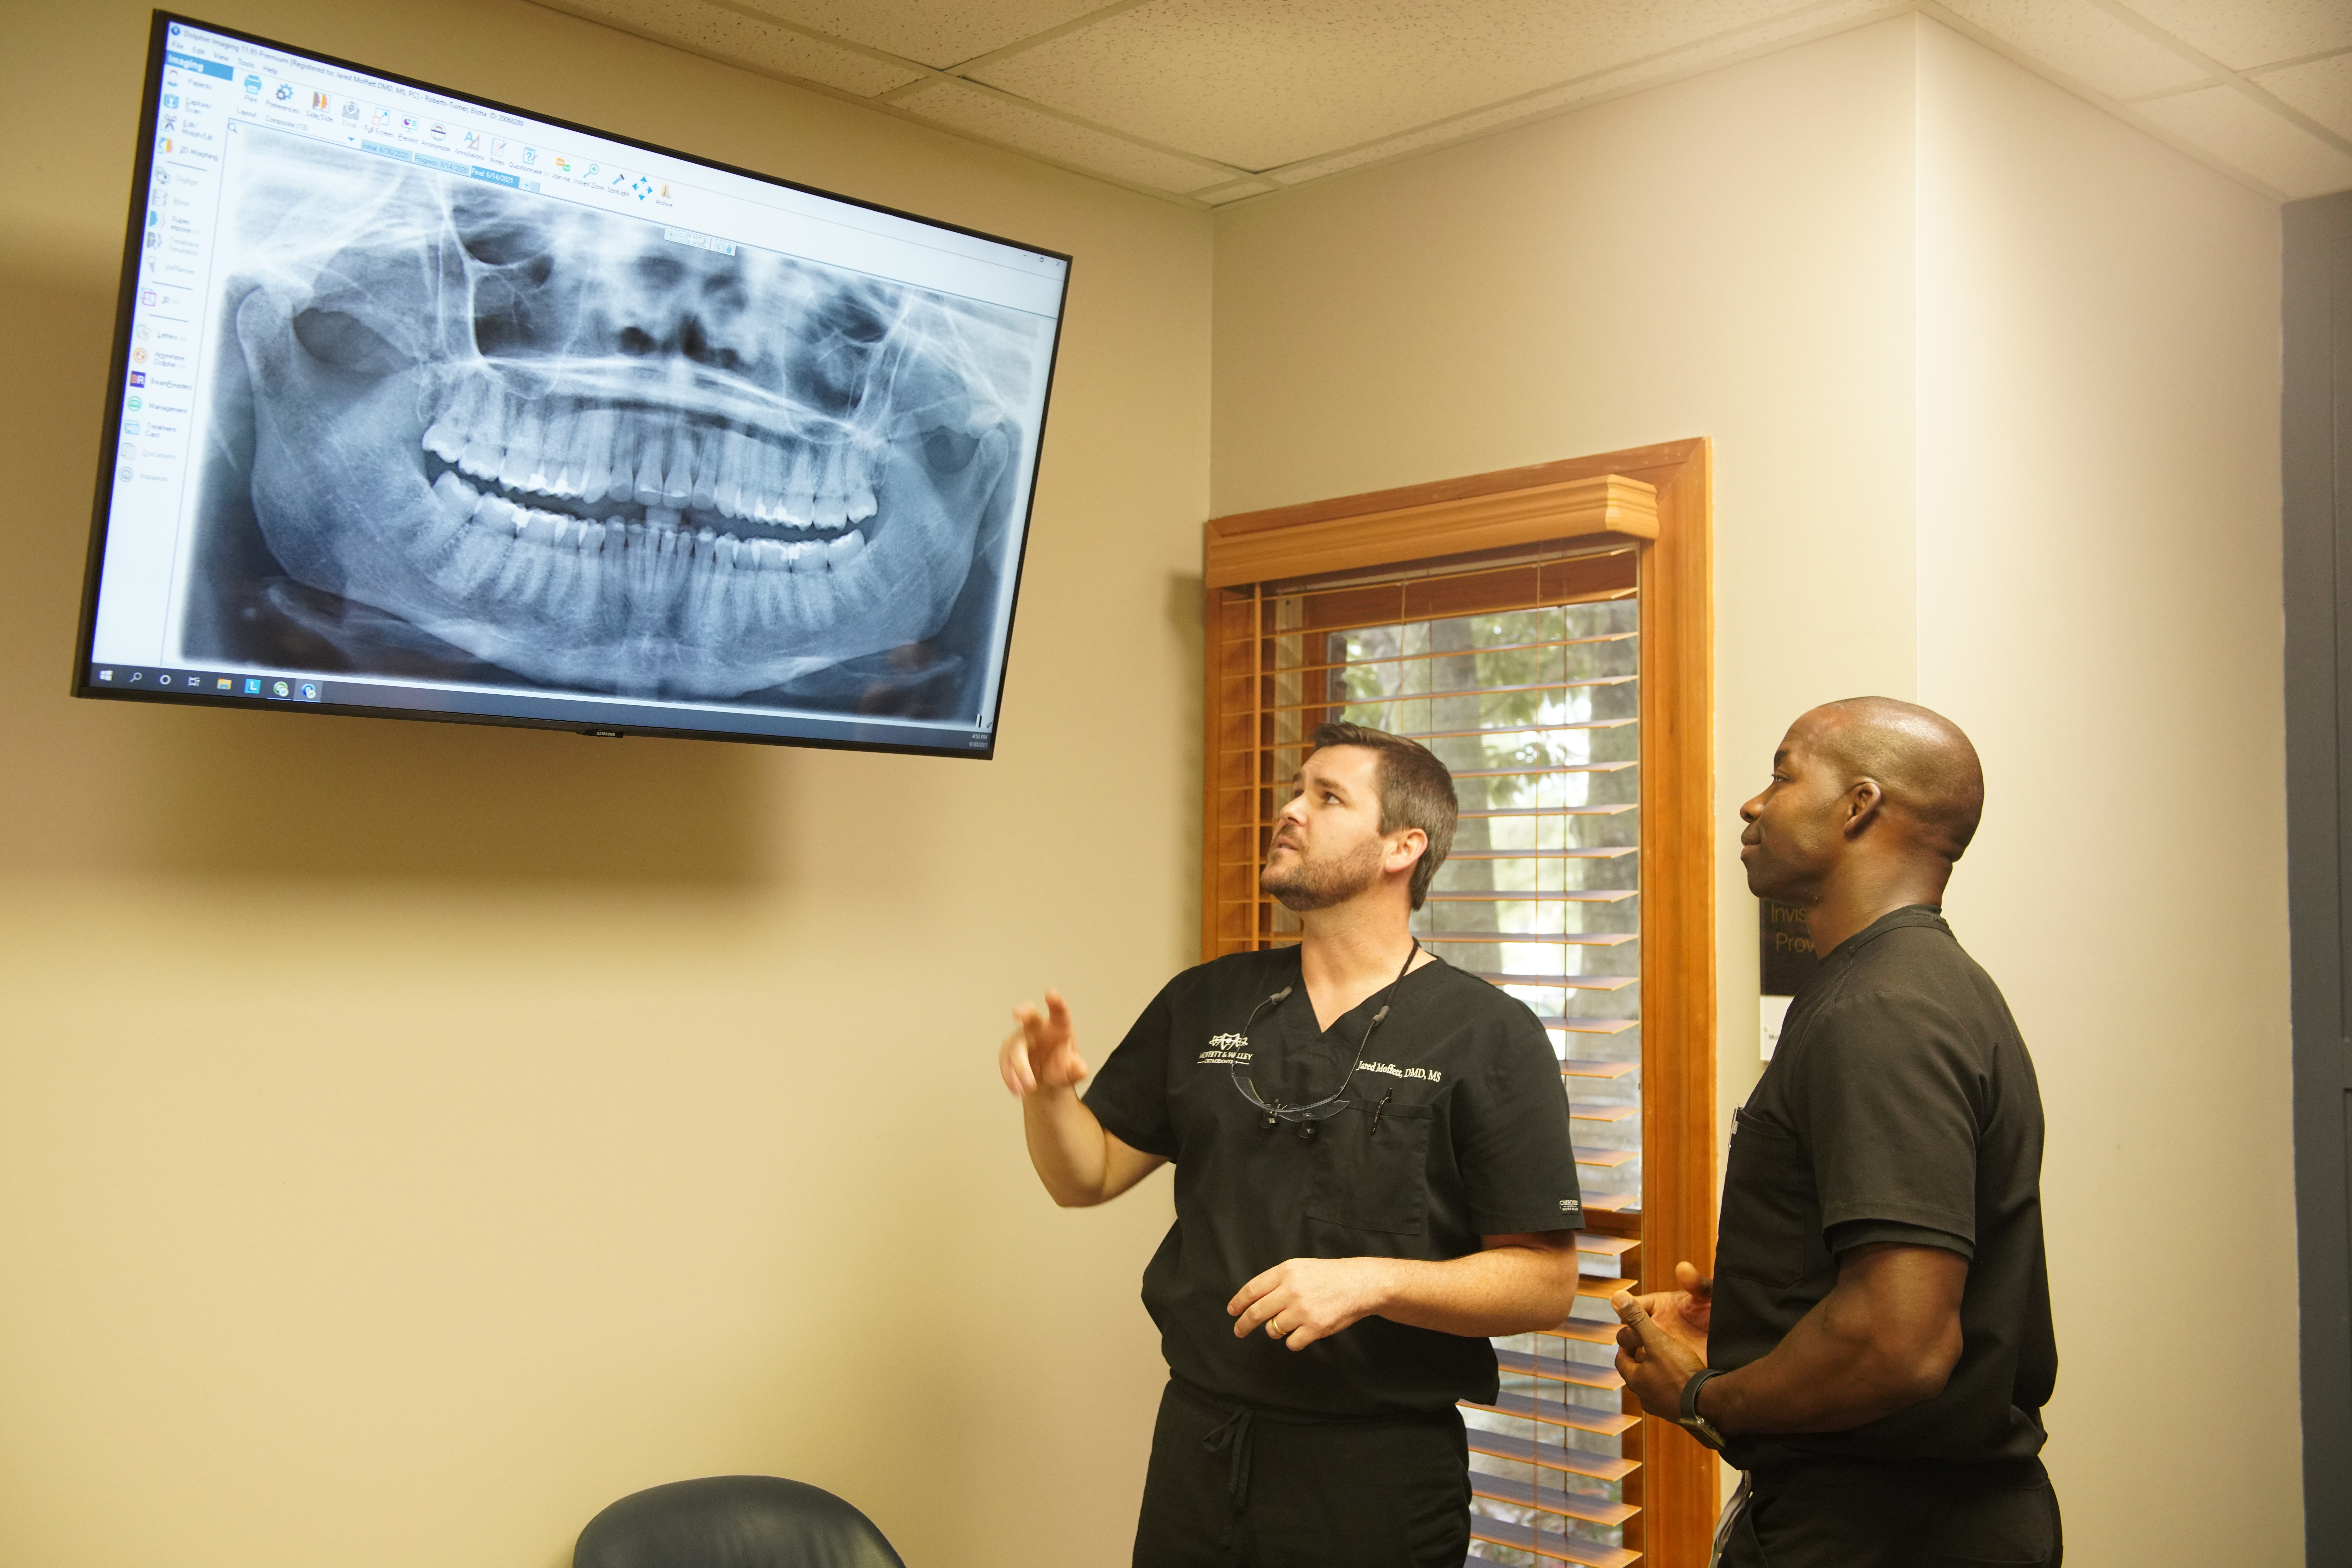 Teeth grinding at night affects your sleep cycle, dental health, & even your well-being, but the Moffett & Walley team is here to help!